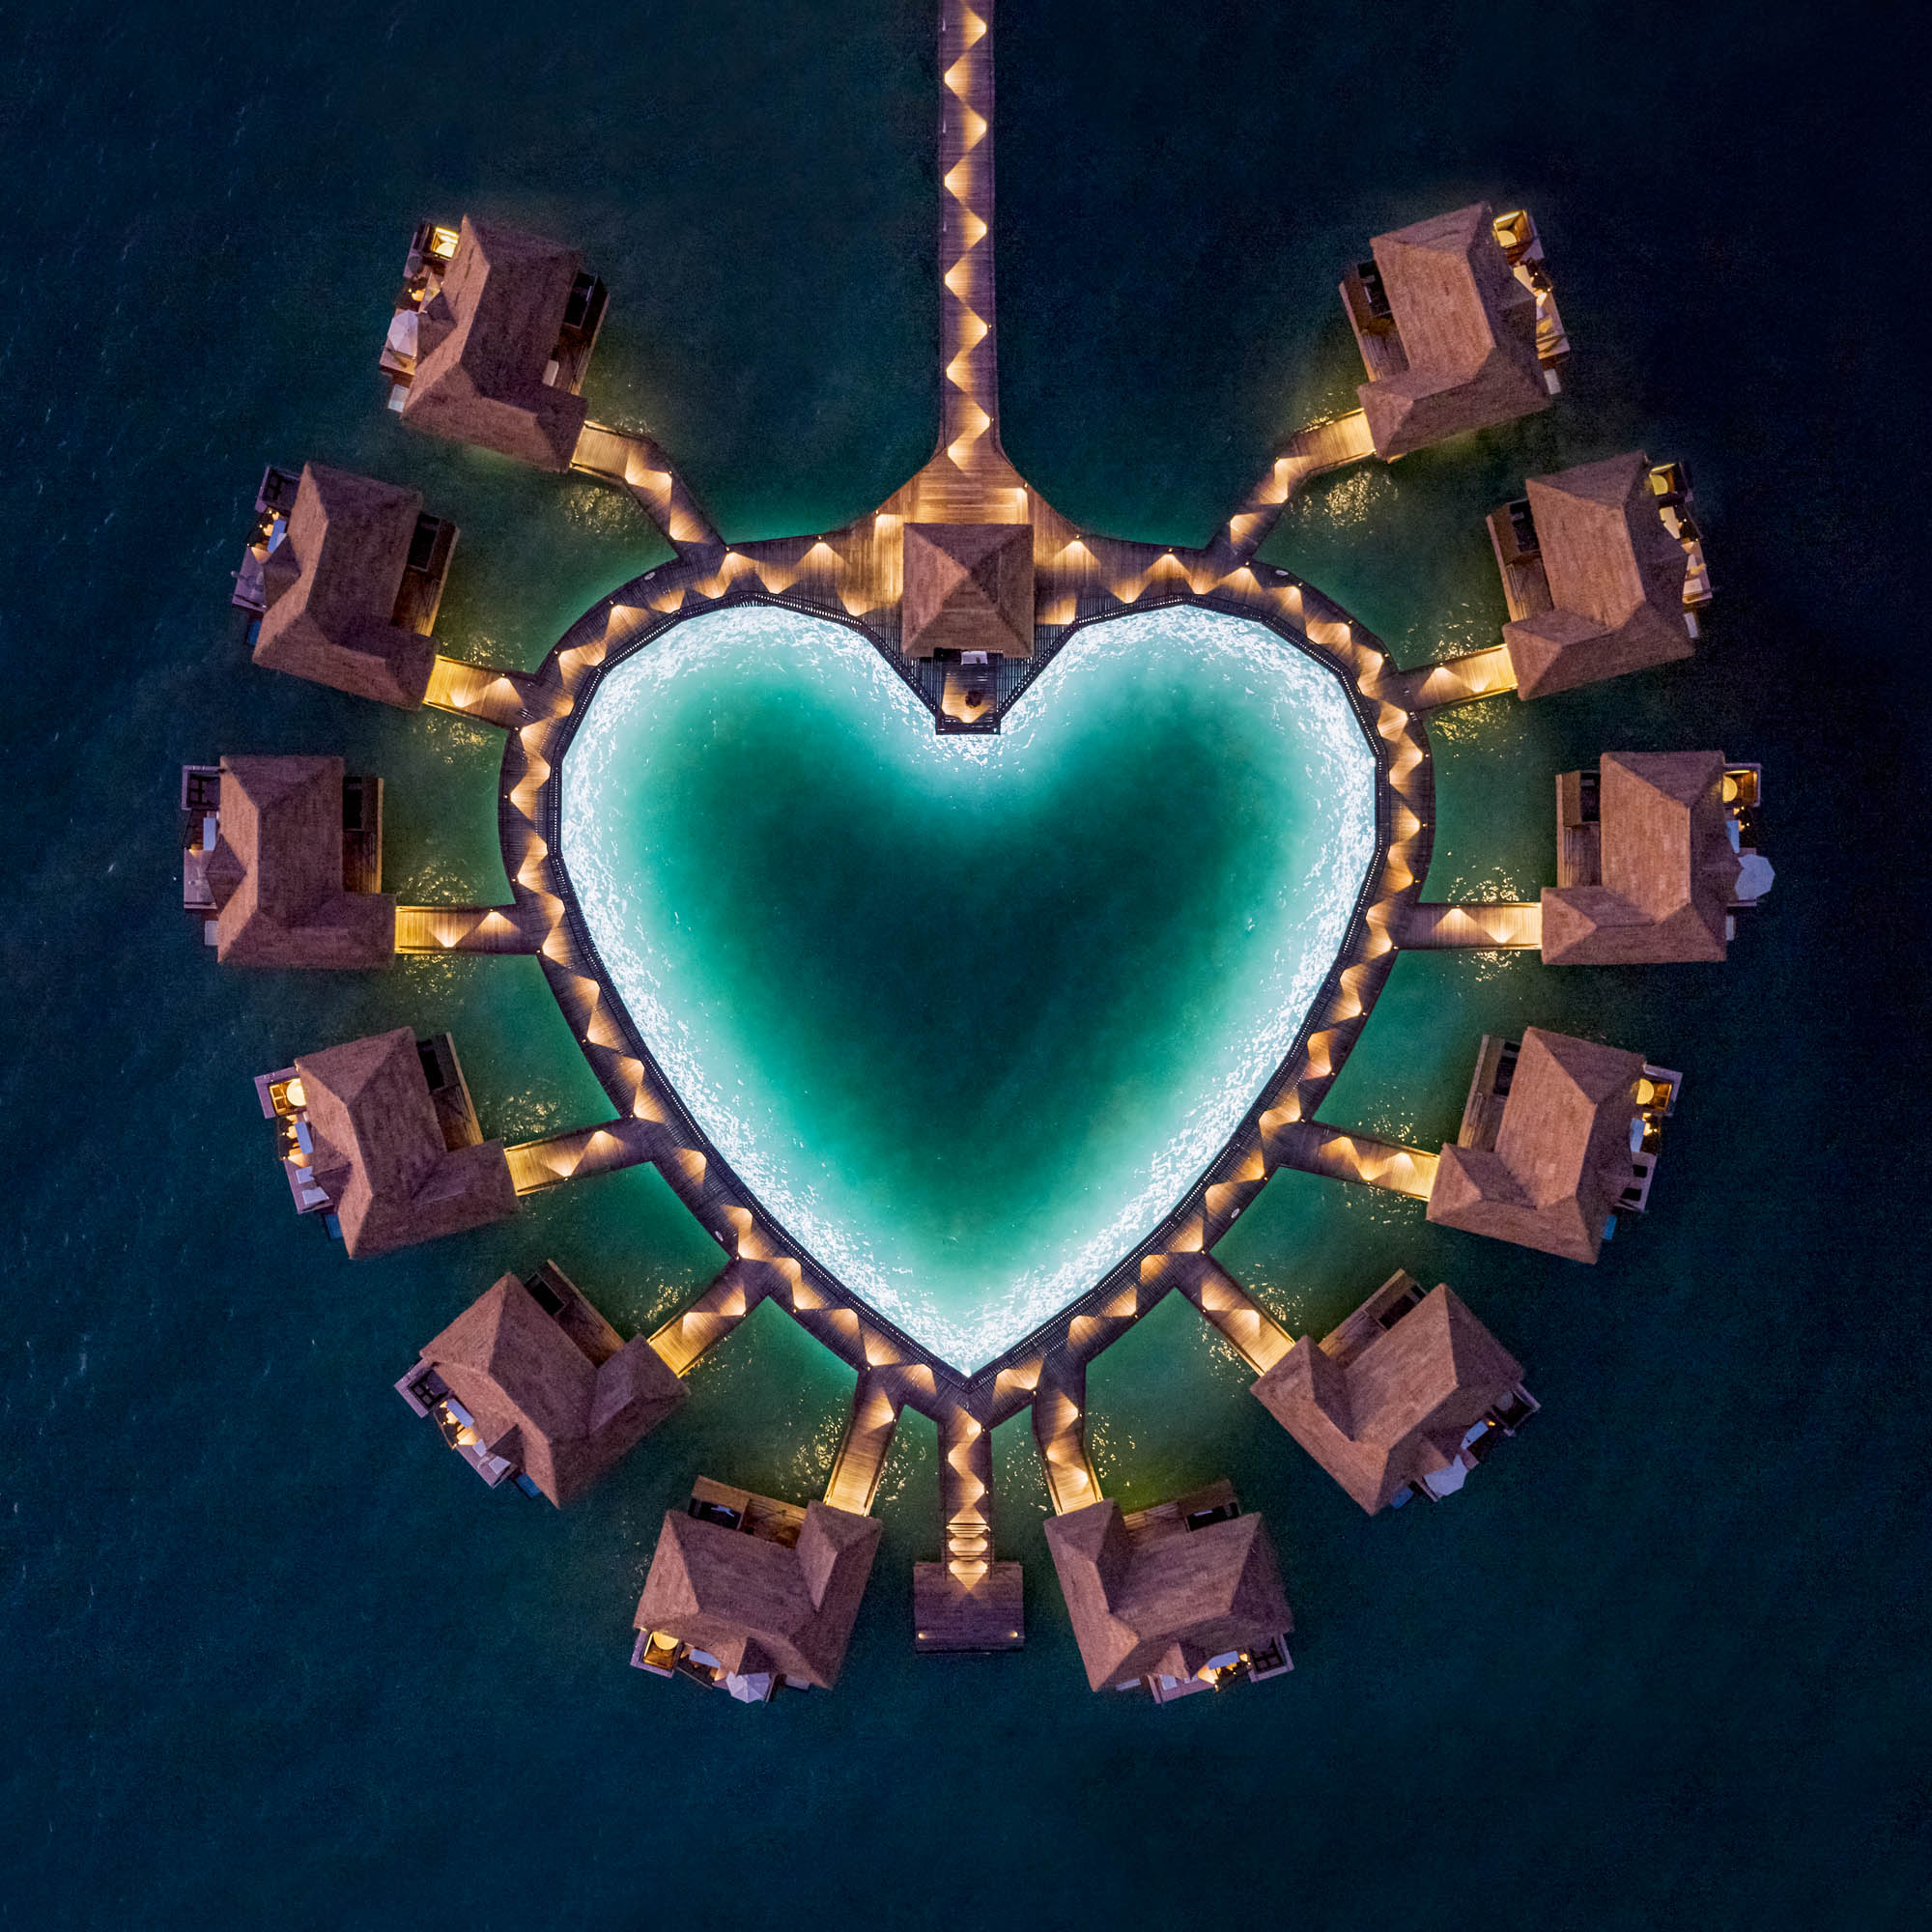 Night aerial photography over water by Shawn Talbot for Sandals Resorts